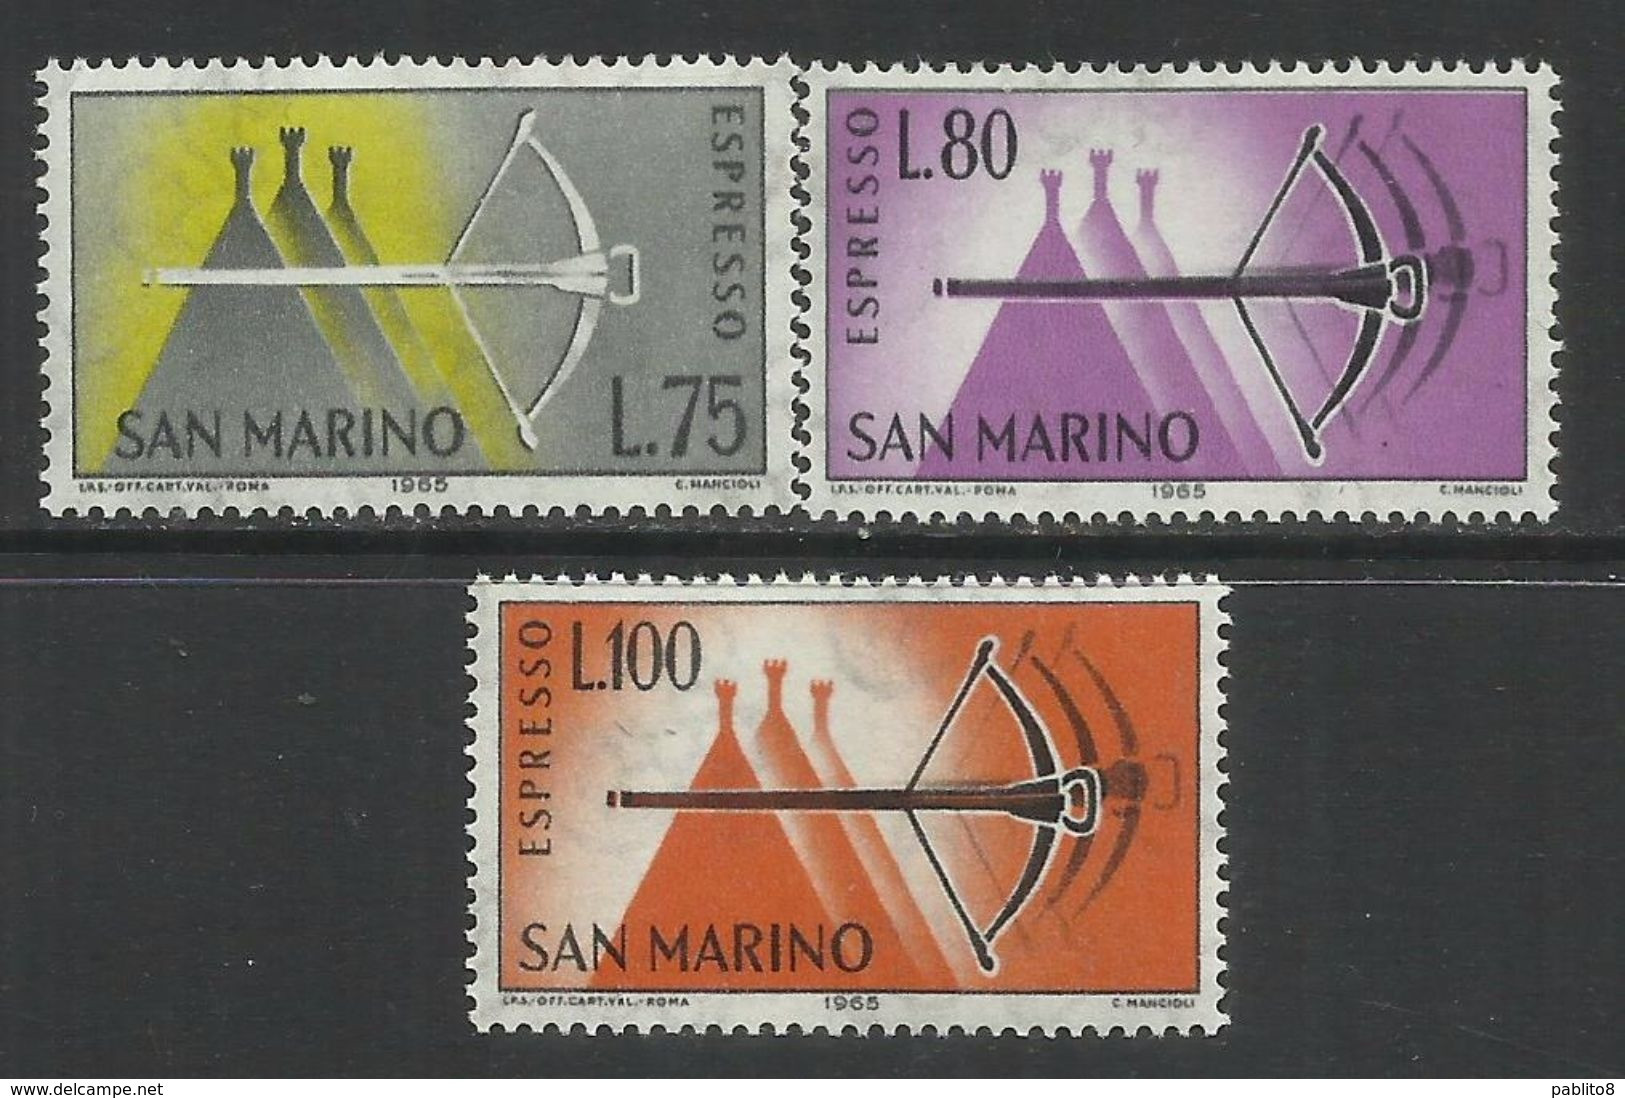 SAN MARINO 1966 ESPRESSI BALESTRA SPECIAL DELIVERY CROSSBOW SERIE COMPLETA COMPLETE SET MNH - Timbres Express